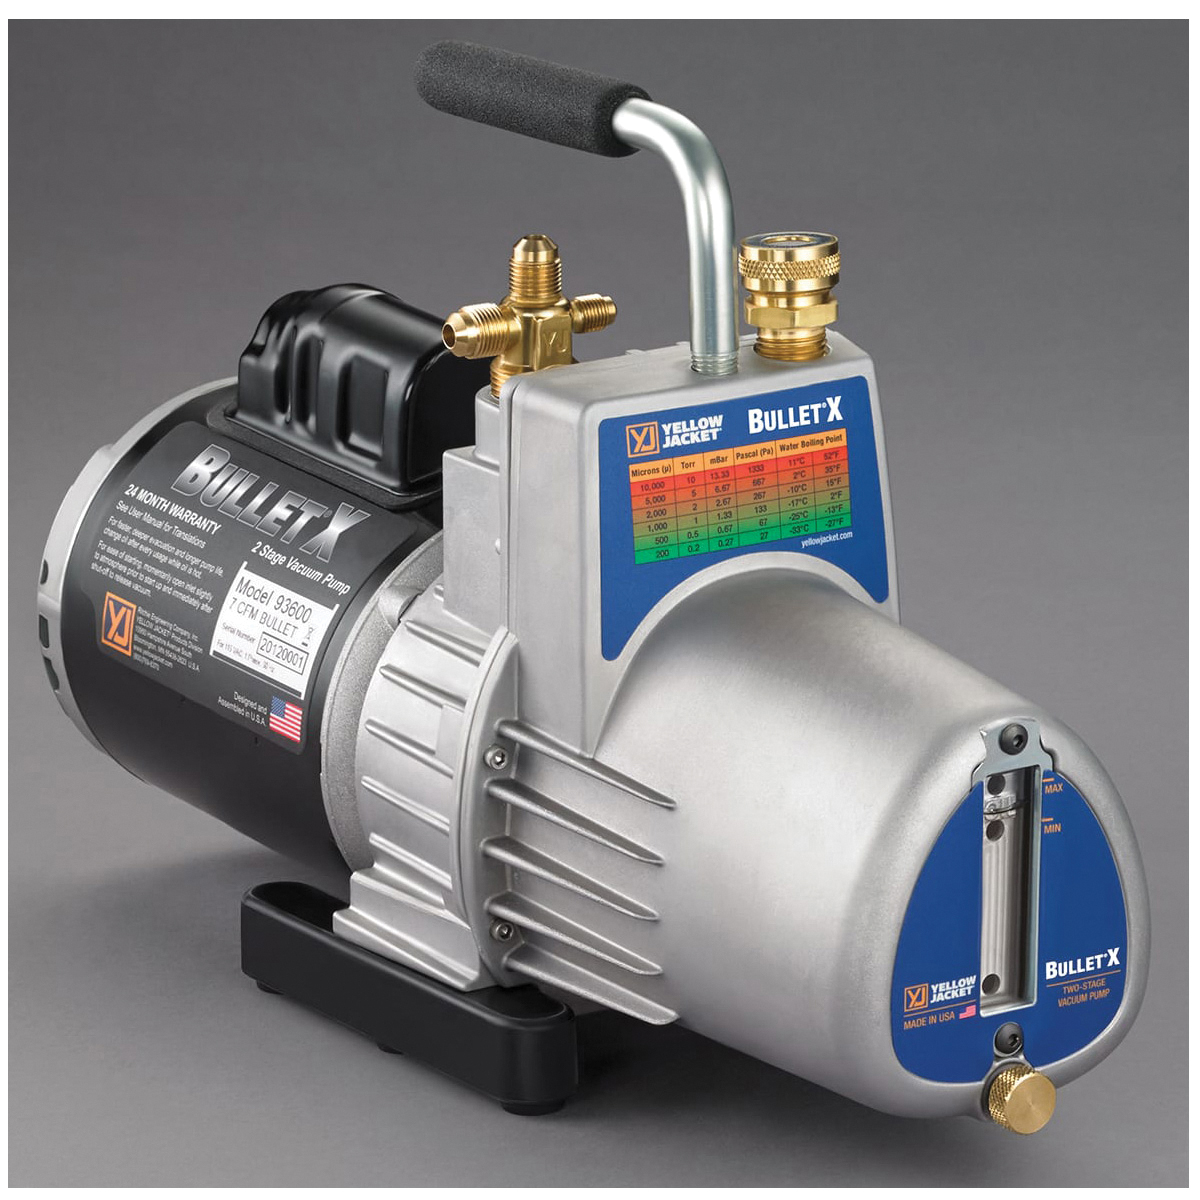 Yellow Jacket® BULLET®X 93600 2-Stage Vacuum Pump, 115 V, 1/2 hp, 1/4 x 3/8 x 3/8 in Connection, 7 cfm